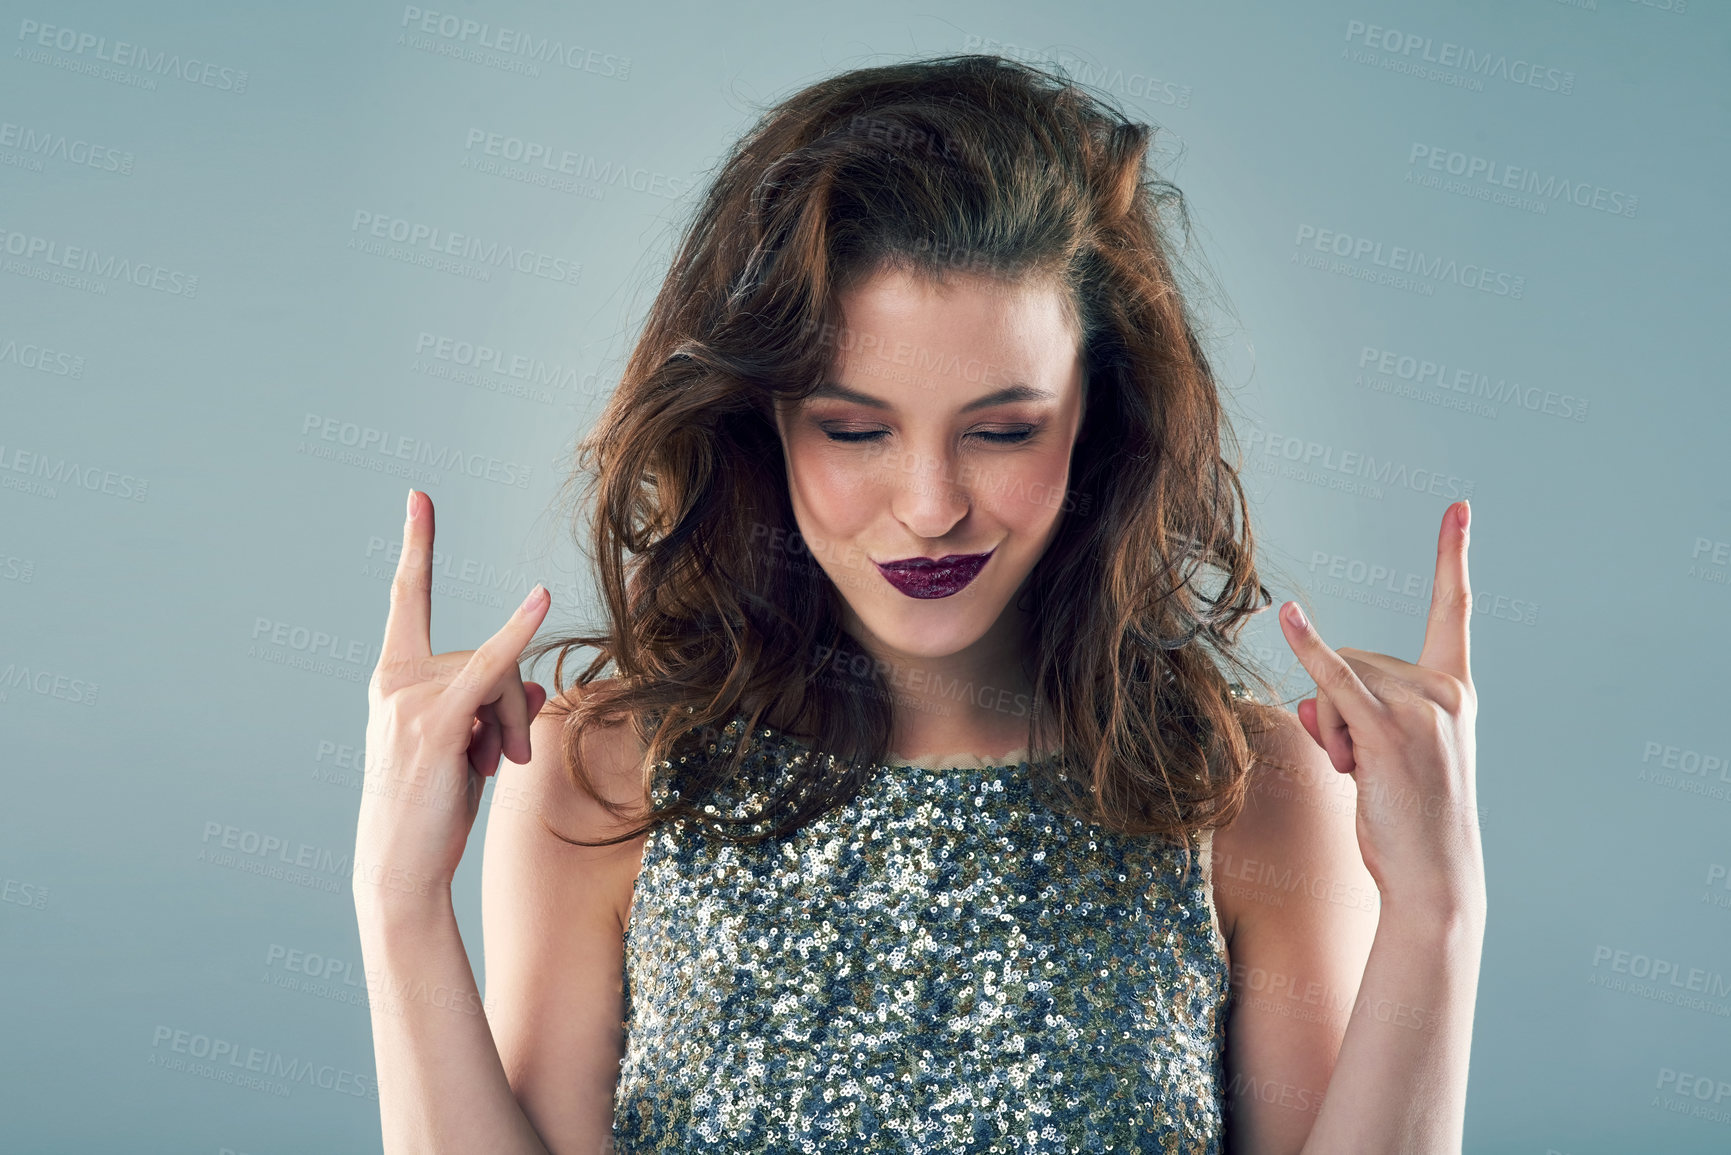 Buy stock photo Studio shot of a young woman making a hand gesture against a grey background